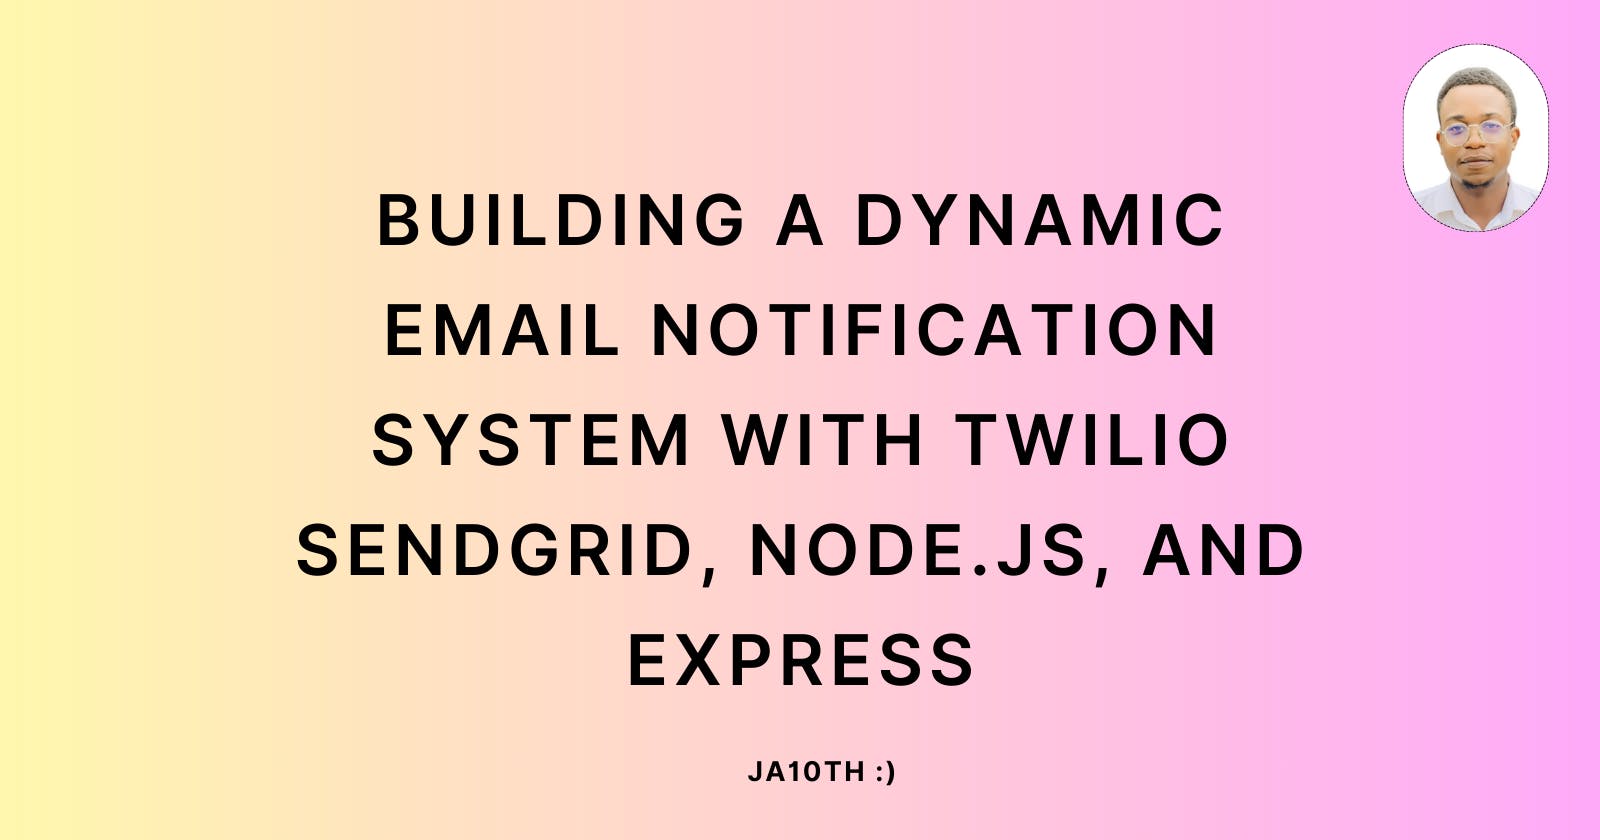 Building a Dynamic Email Notification System with Twilio SendGrid, Node.js, and Express